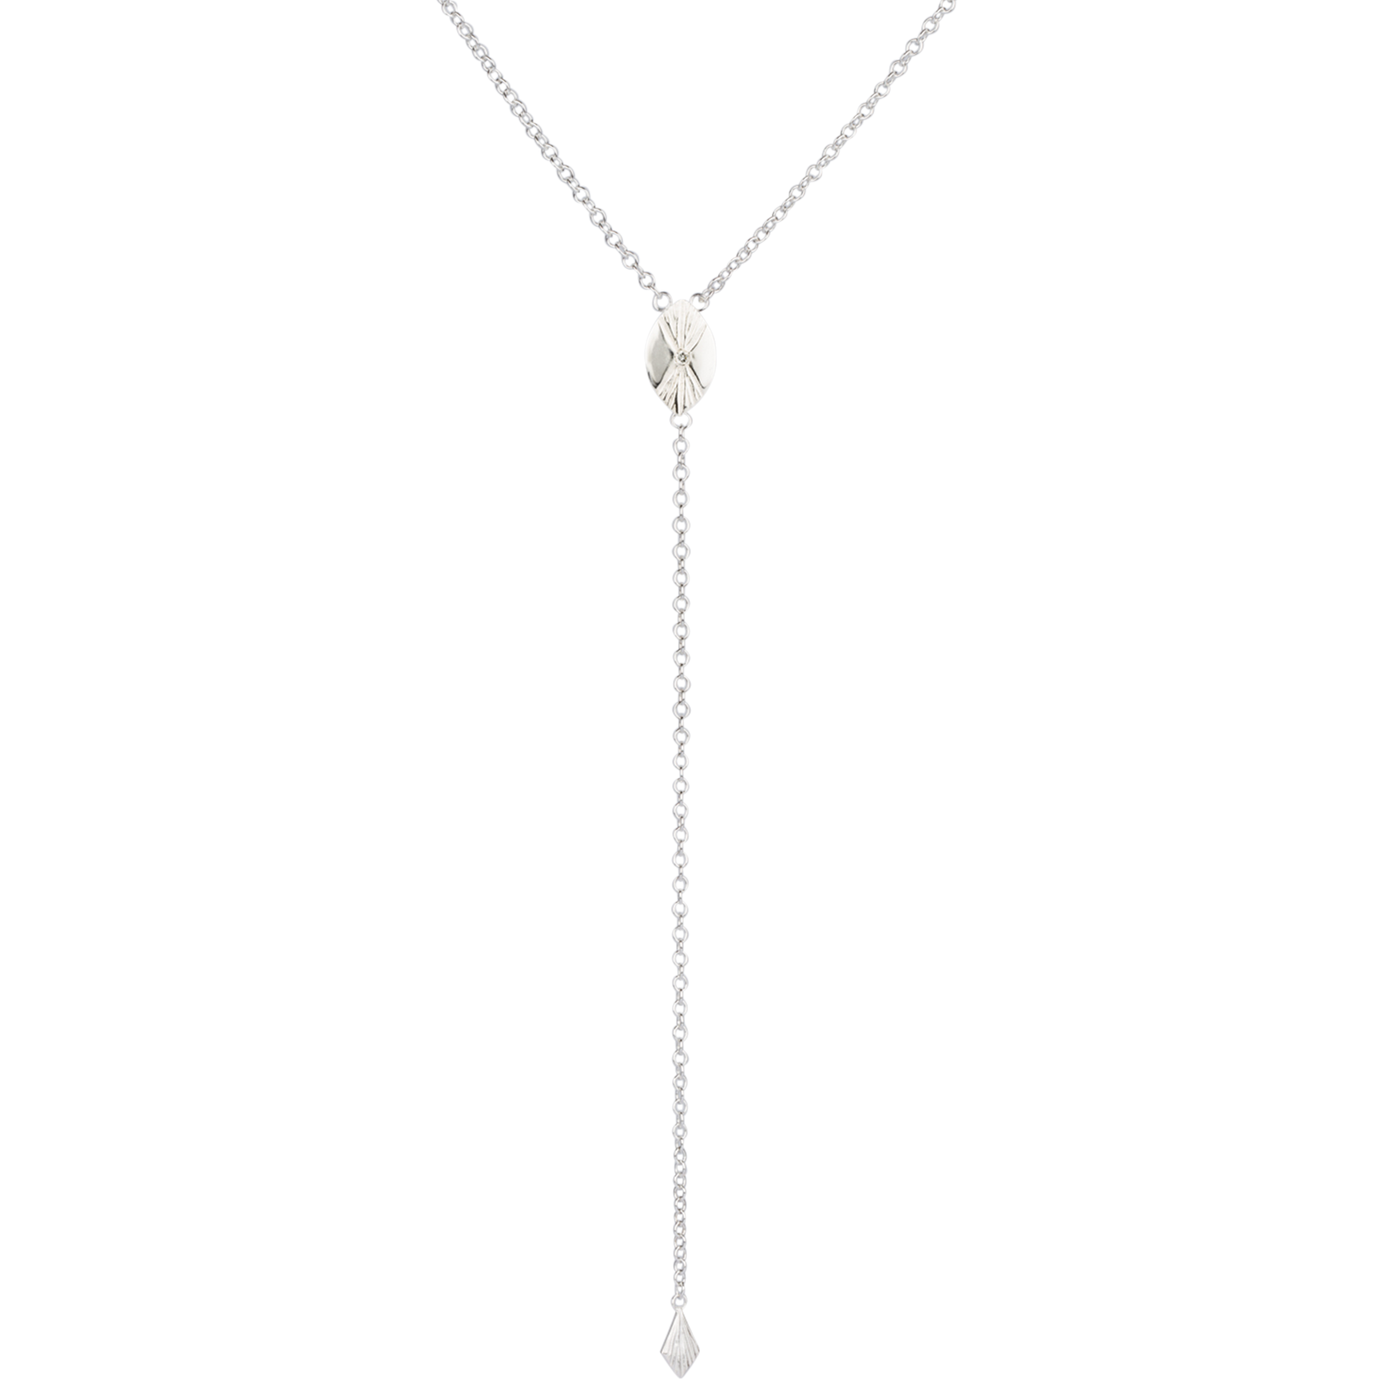 Prism Lariat in Sterling Silver by Corey Egan on a white background